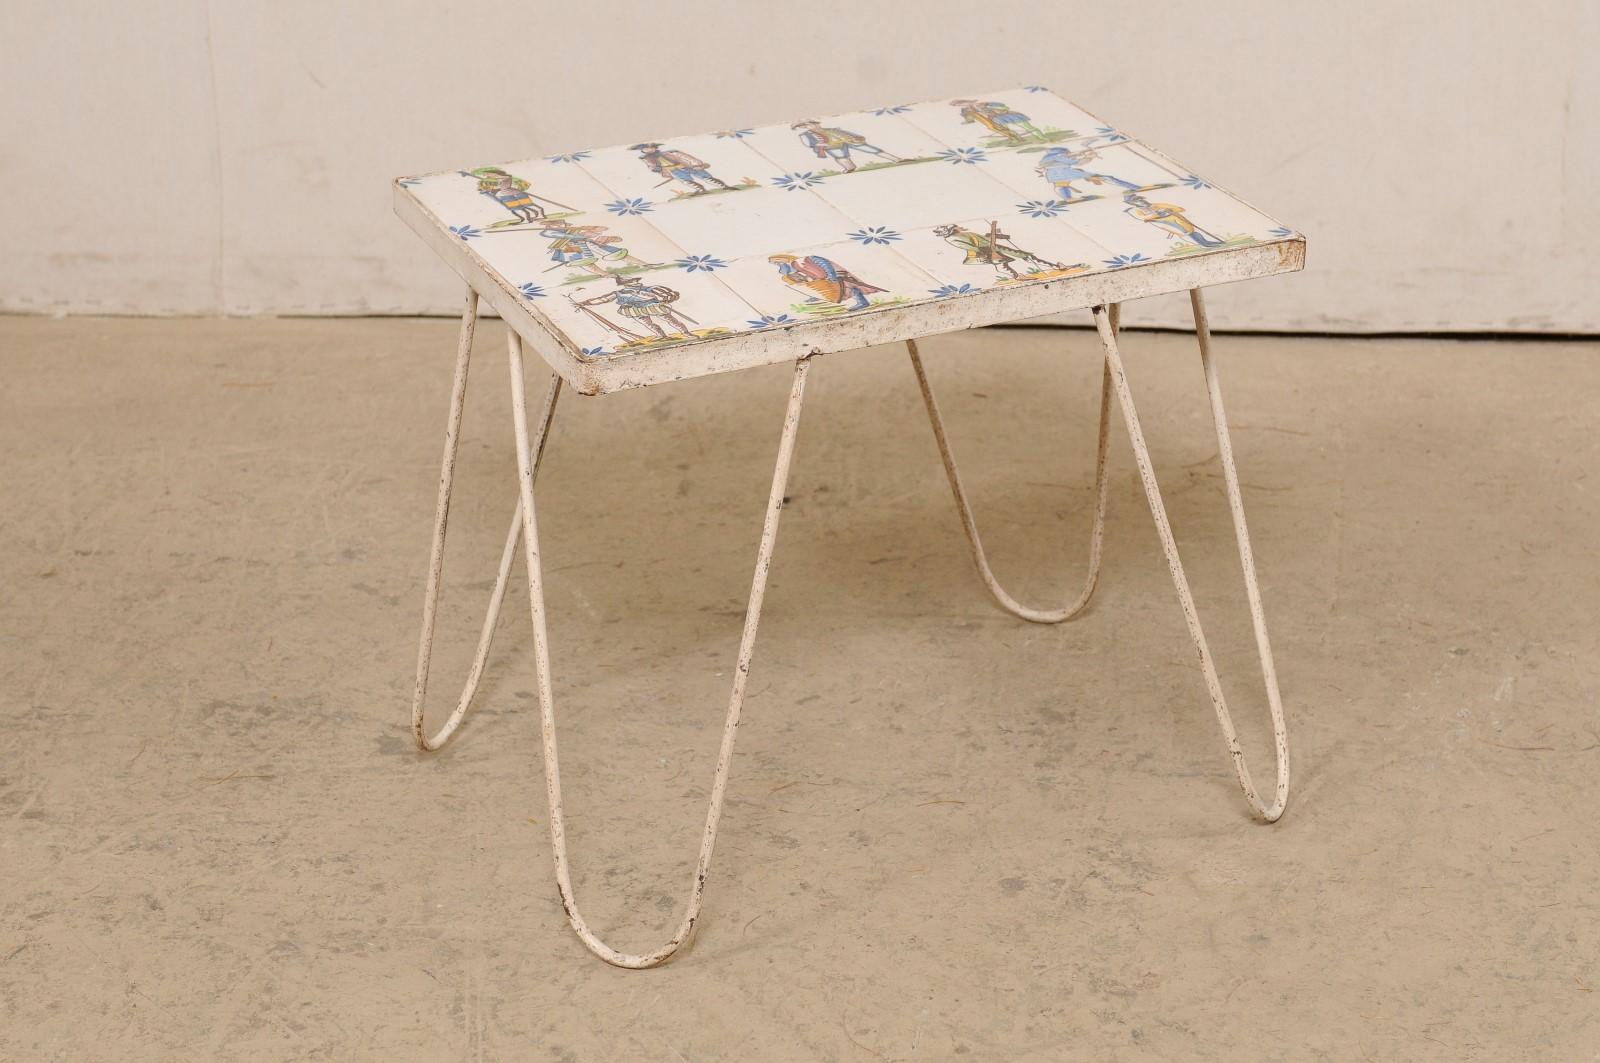 A Spanish decorative tile top side table on metal base. This vintage side table from Spain has been adorn with a series of artisan painted tiles portraying various military figures, set around the perimeter with center being simple white tiles (but